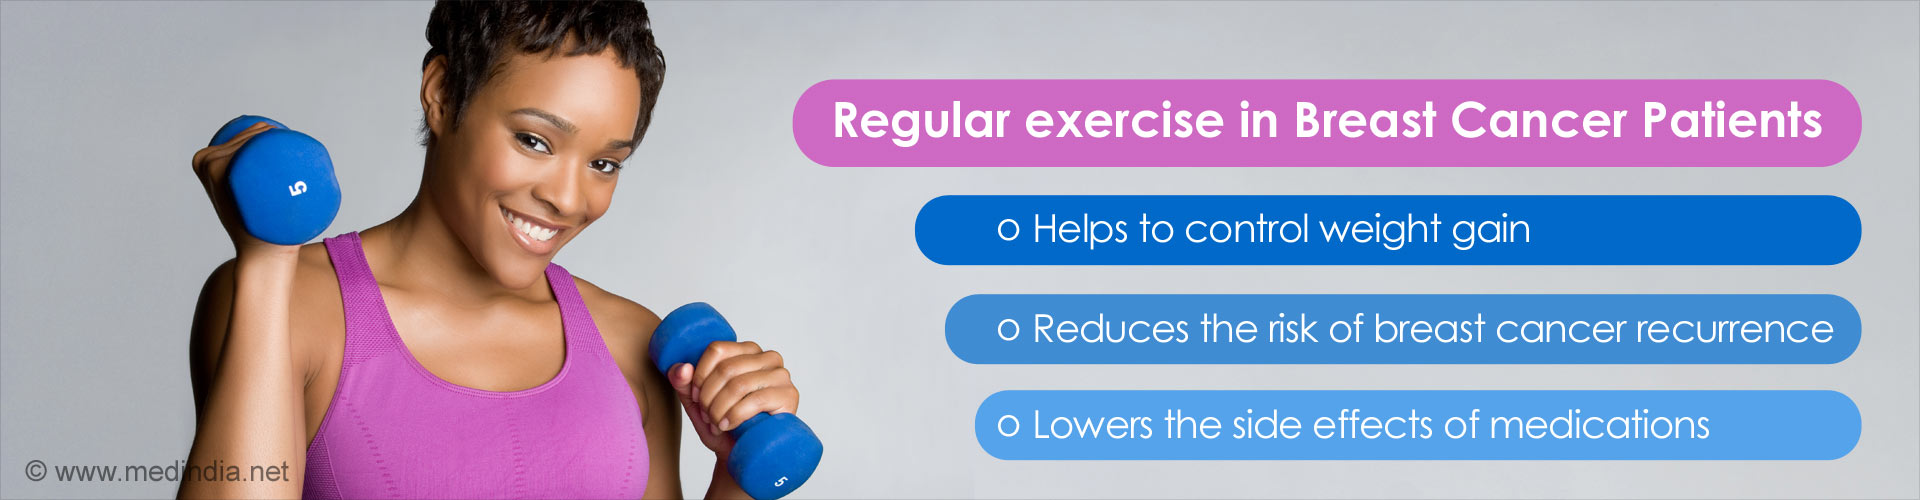 Regular exercise in breast cancer patients
- helps to control weight gain
- reduces the risk of breast cancer recurrence
- lowers the sider effects of medications